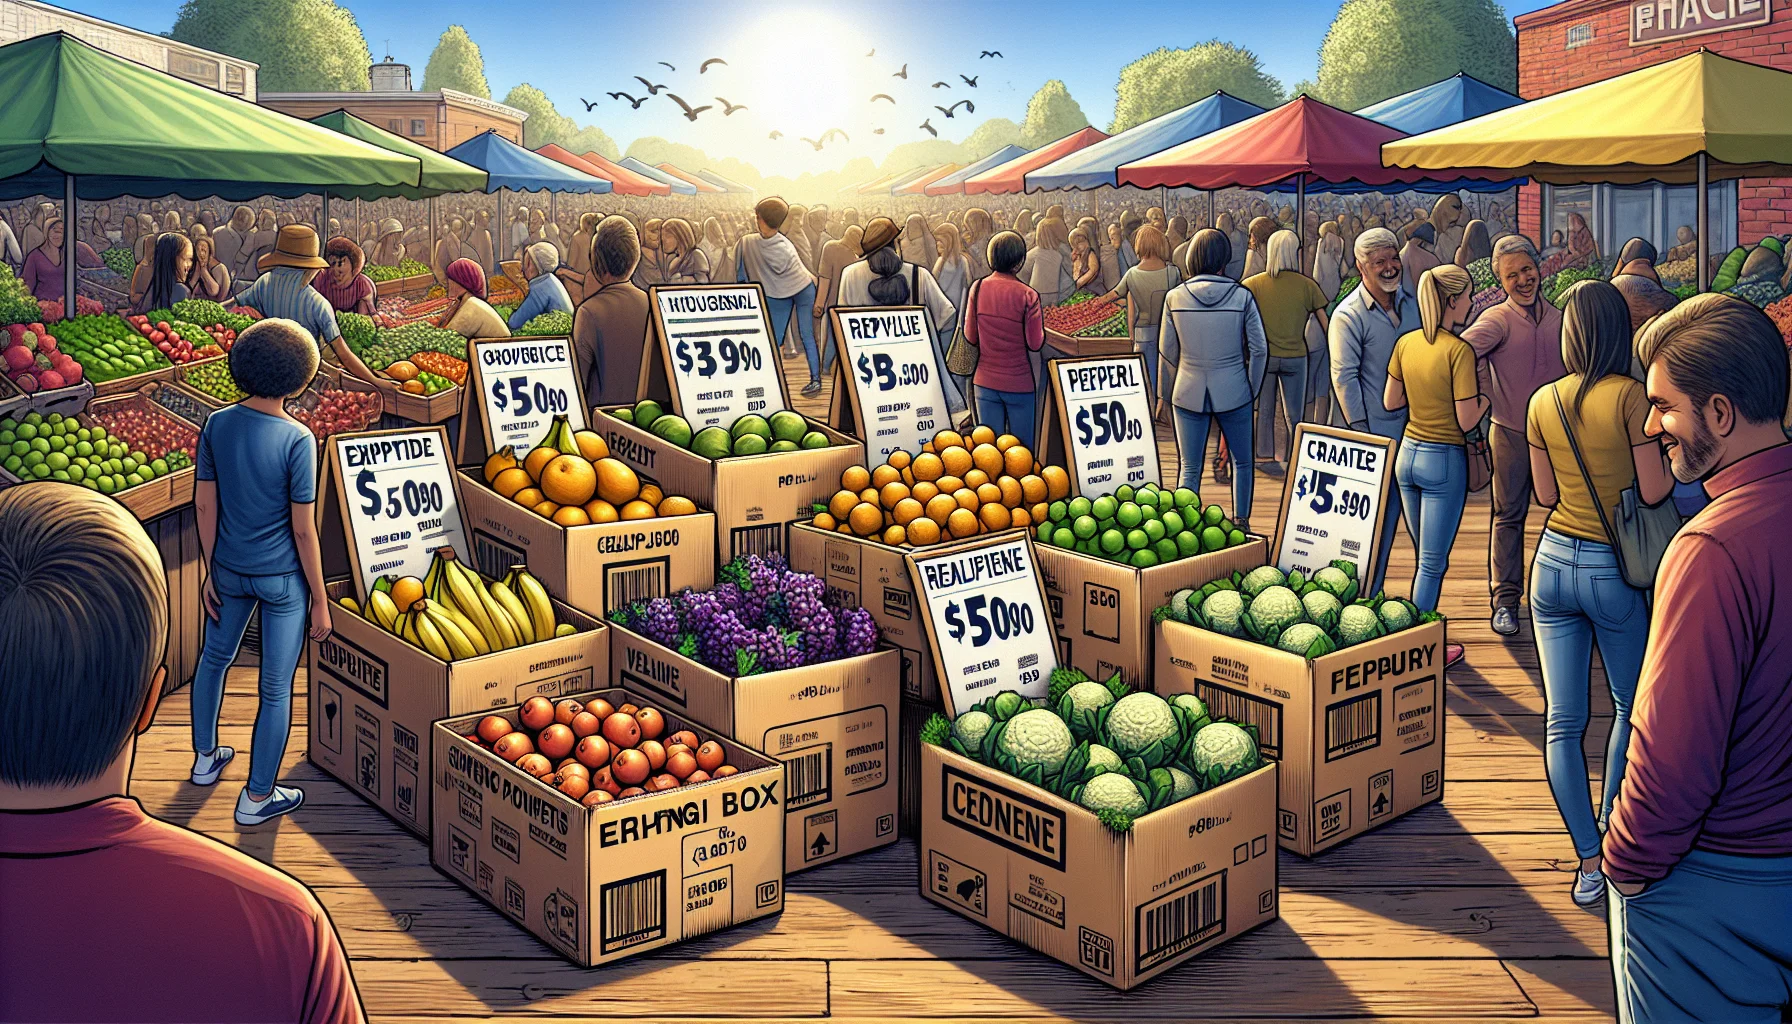 Create an amusing and realistic illustration of a scene where empty shipping boxes are ingeniously being used for organization. Picture this in a vibrant farmer's market setting, brimming with an array of fresh fruits and veggies. Imagine creative price tags on these boxes that humorously persuade customers to choose the healthier options by highlighting how economical they are in comparison to processed foods. A busy, mixed-descent crowd is seen inspecting the produce and chuckling at the witty price tags.